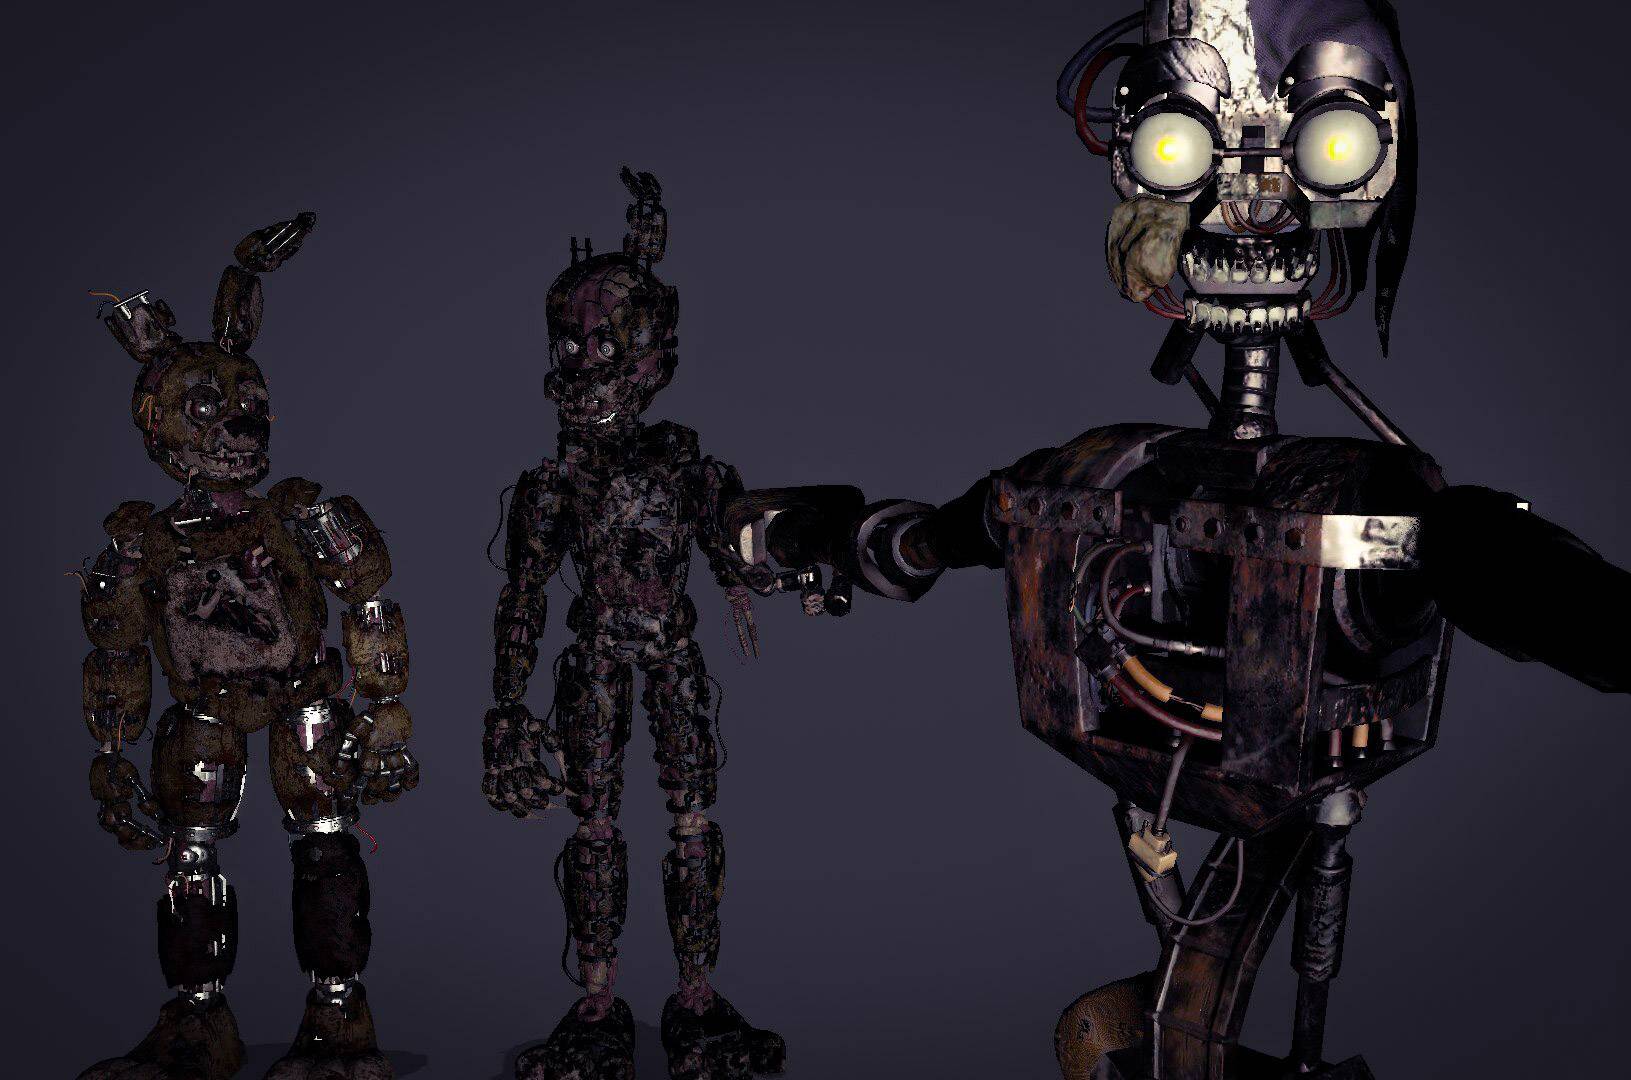 FNaF Security Breach Ruin DLC Is Coming!! by Lachlanredinkling155 on  DeviantArt